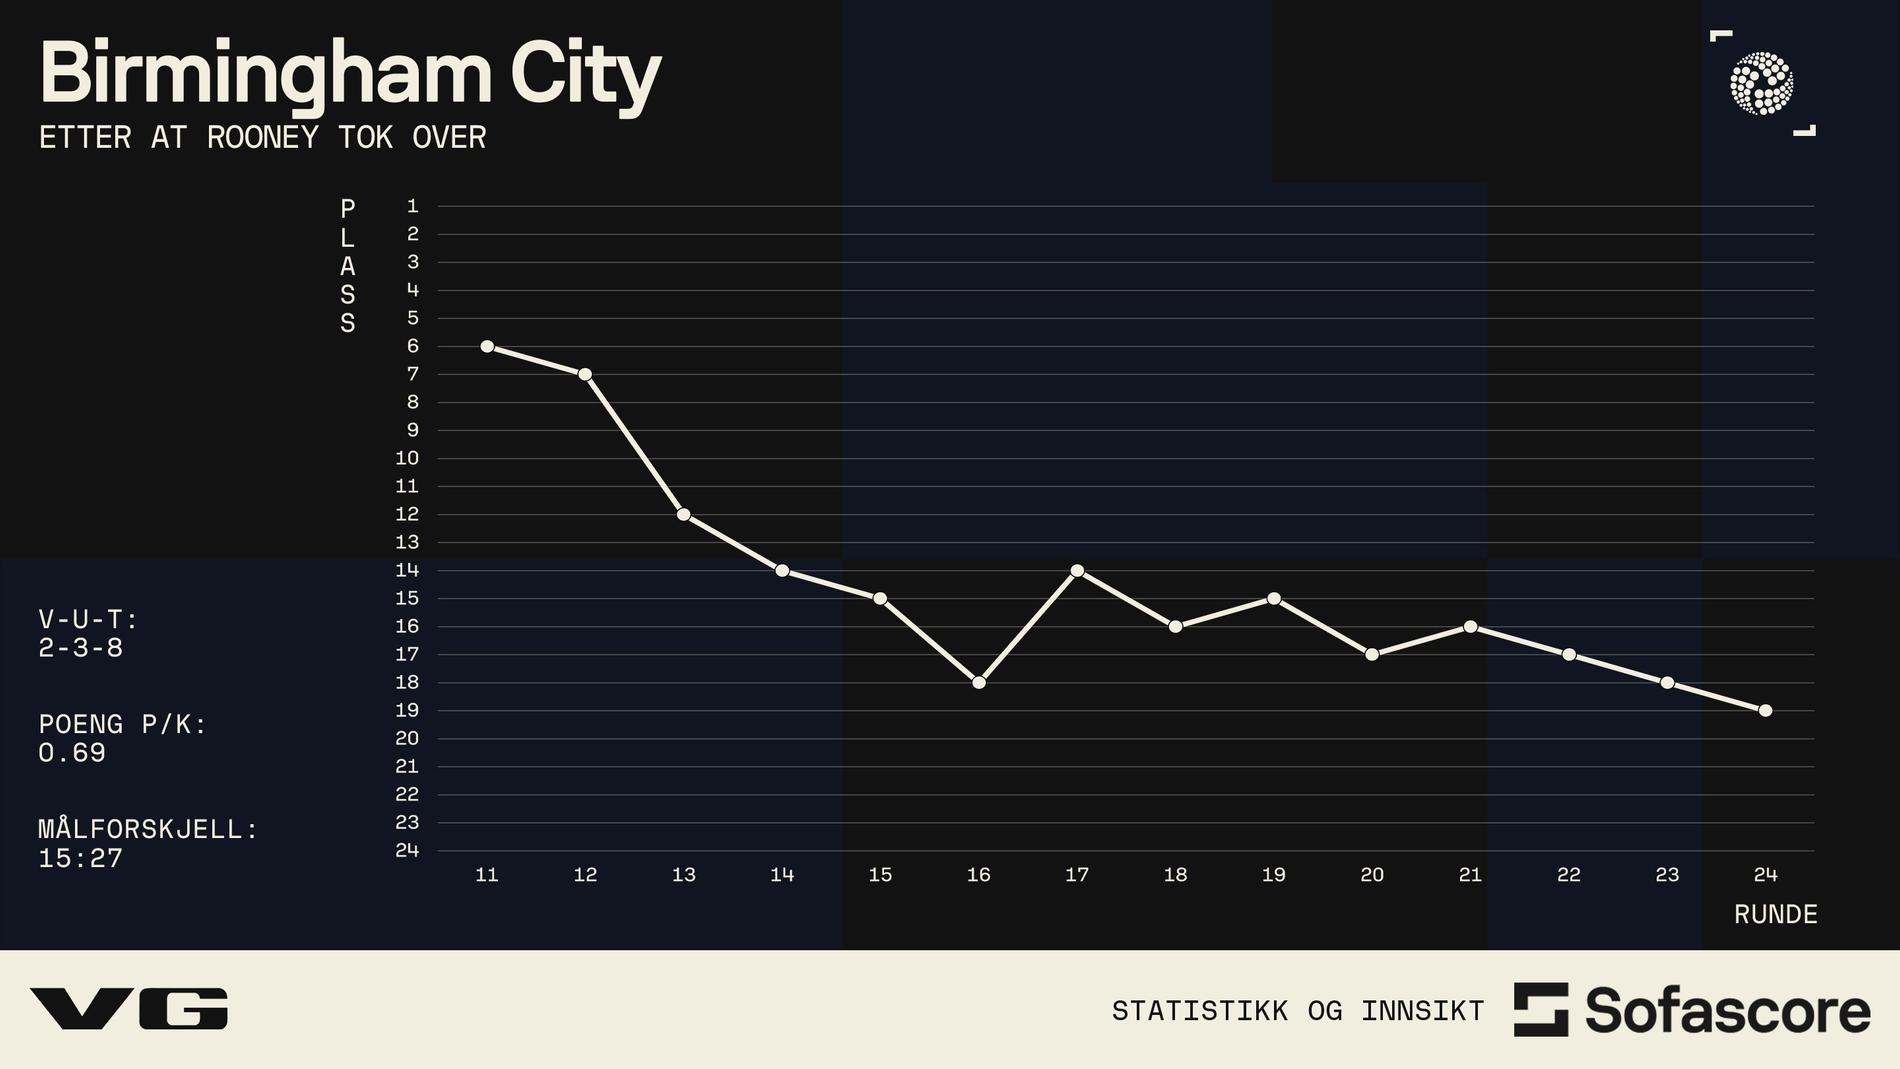 Negative trend: That's how it turned out for Birmingham after Wayne Rooney took over ahead of the 11th round of the league.